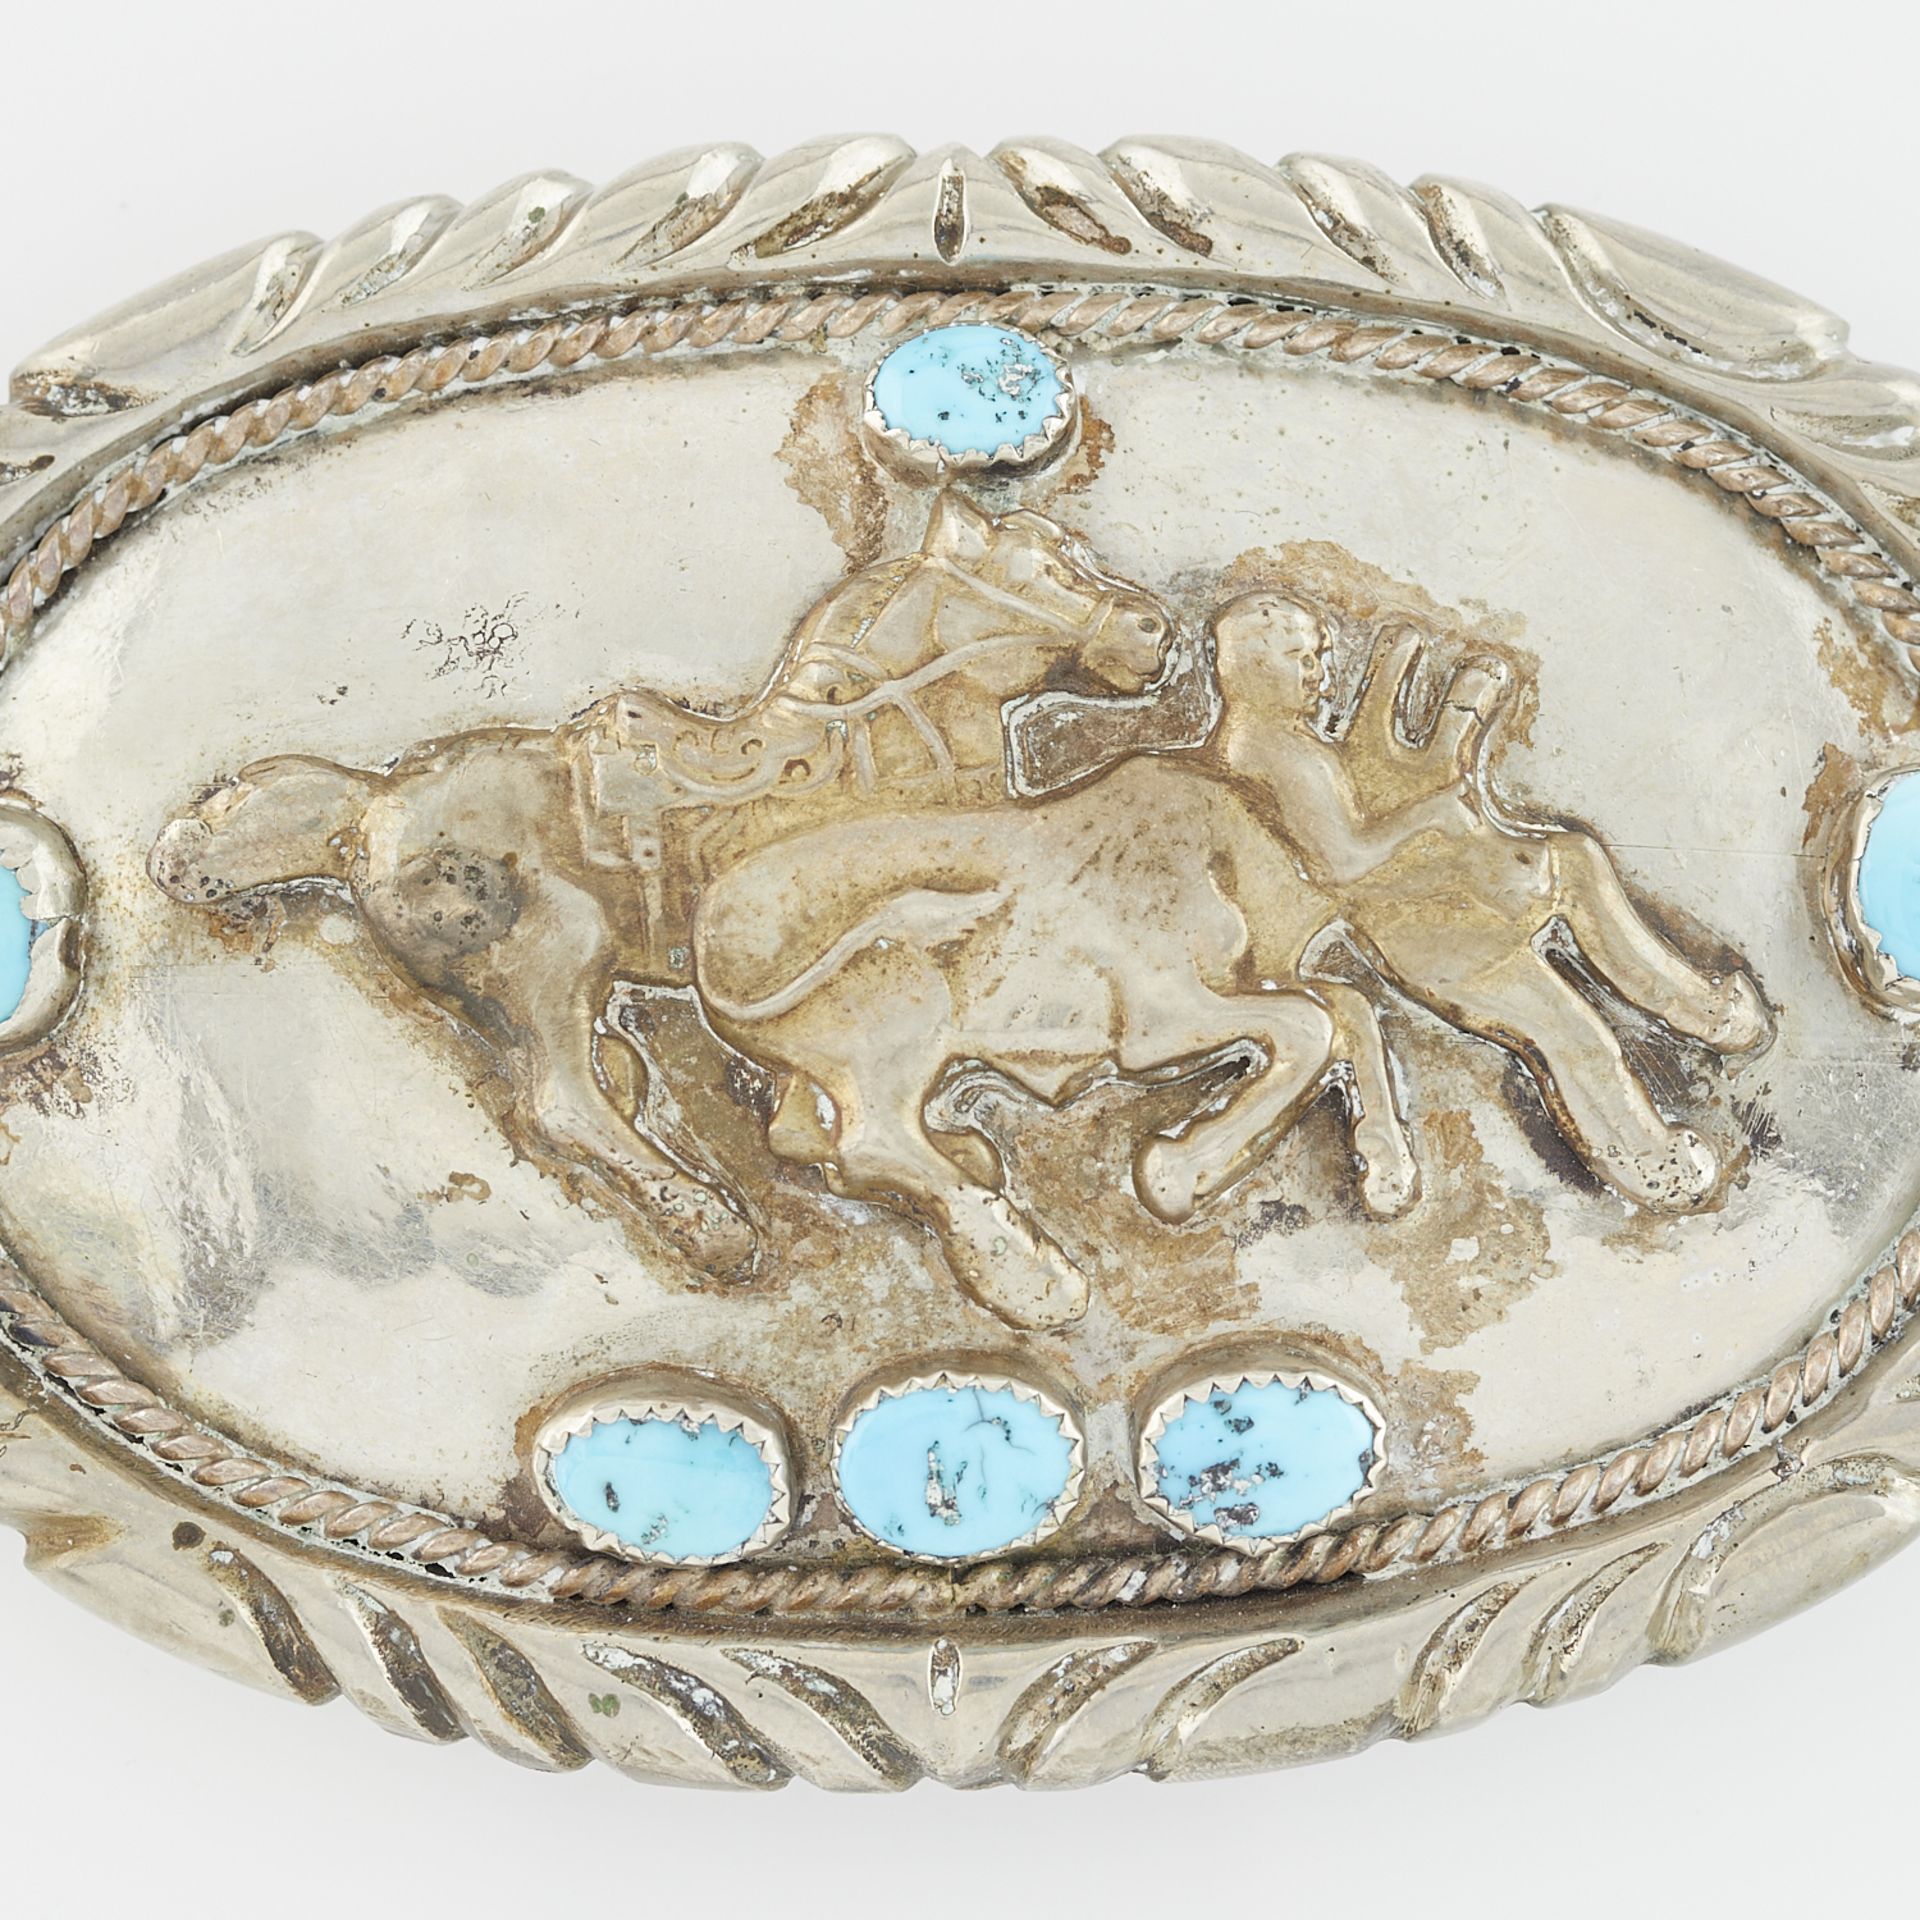 Rodeo Belt Buckle with Turquoise - Image 5 of 6